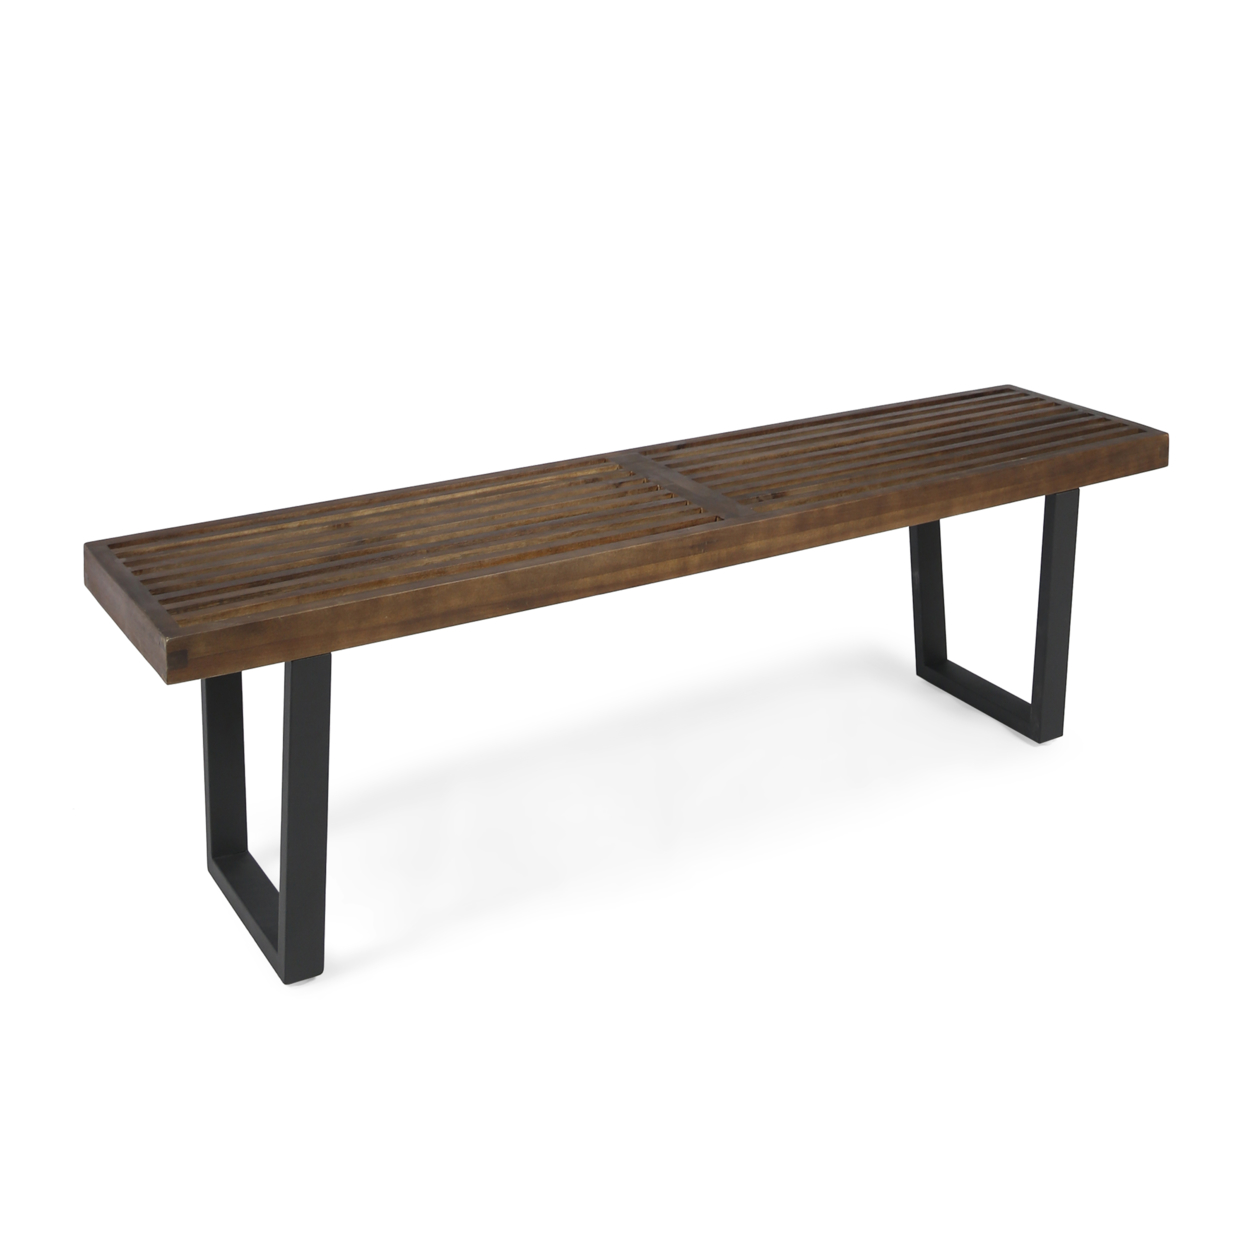 Joa Patio Dining Bench, Acacia Wood With Iron Legs, Modern, Contemporary - Brushed Light Gray Finish